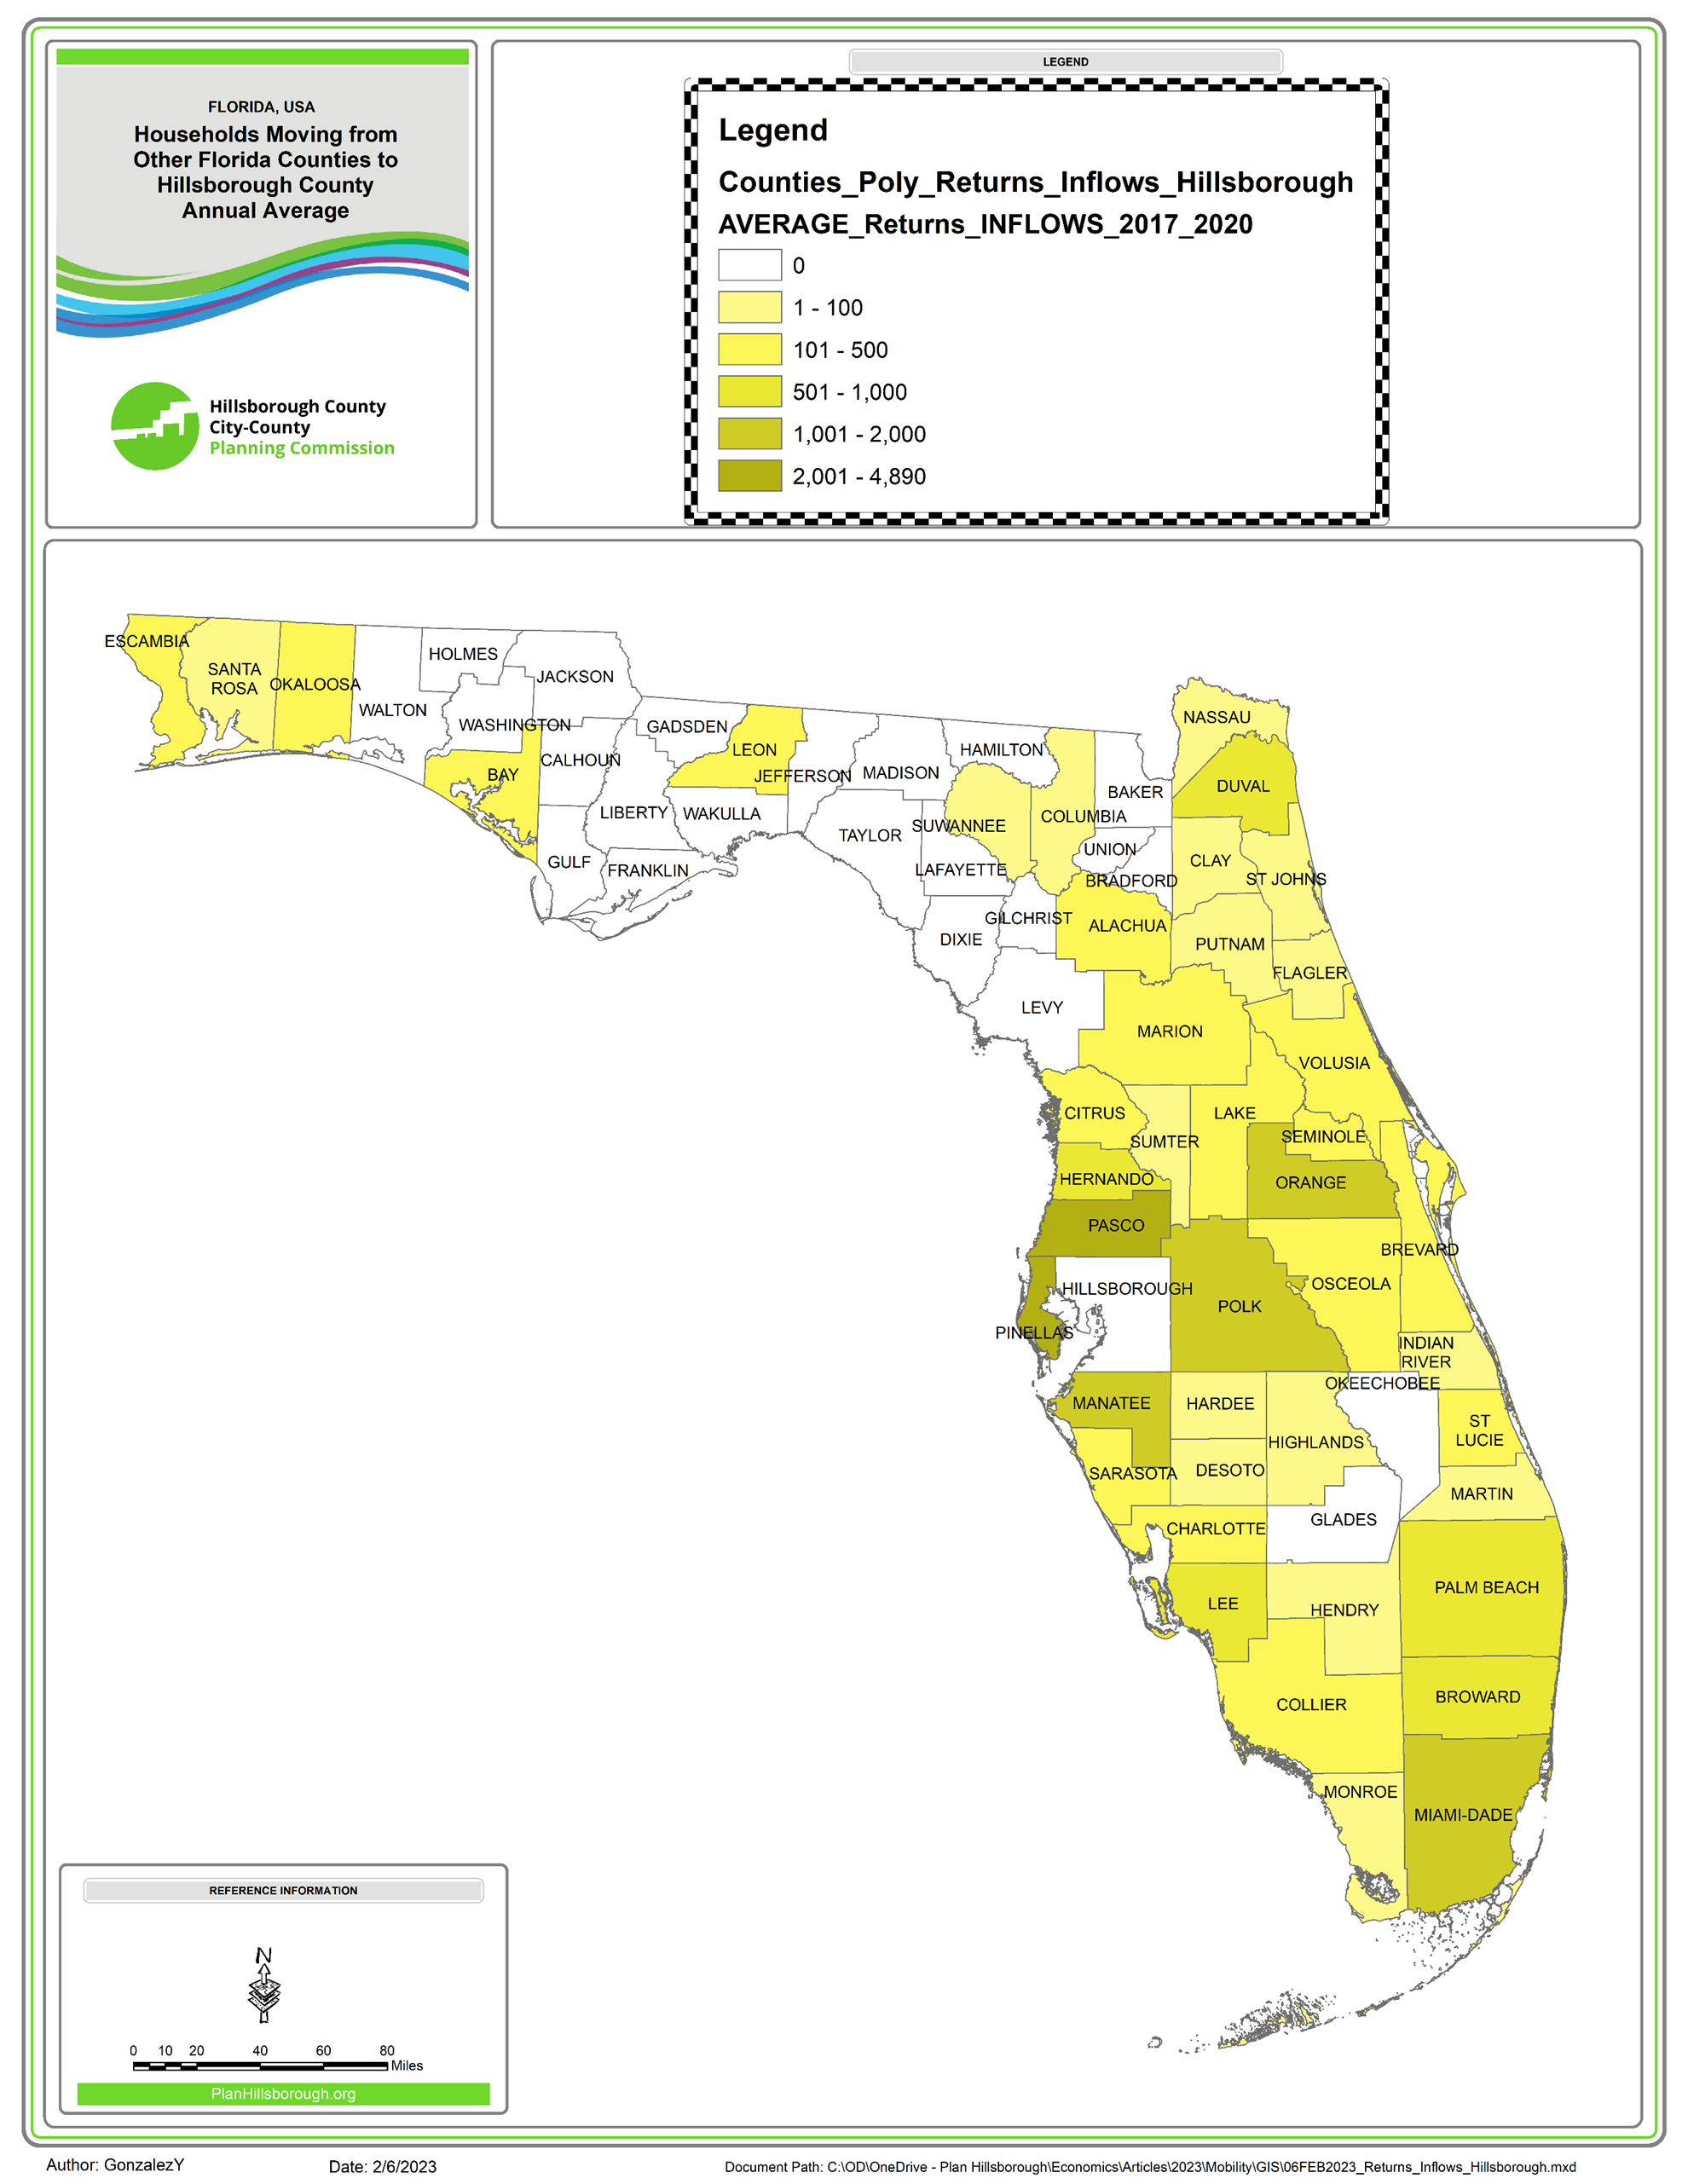 Map shows Florida Counties from which new households moving to Hillsborough County originate.  The counties are classified by the number of new households that move to Hillsborough County from there.  Manatee, Orange, Pasco, Pinellas, and Polk send over 1,000 new households to Hillsborough County yearly.